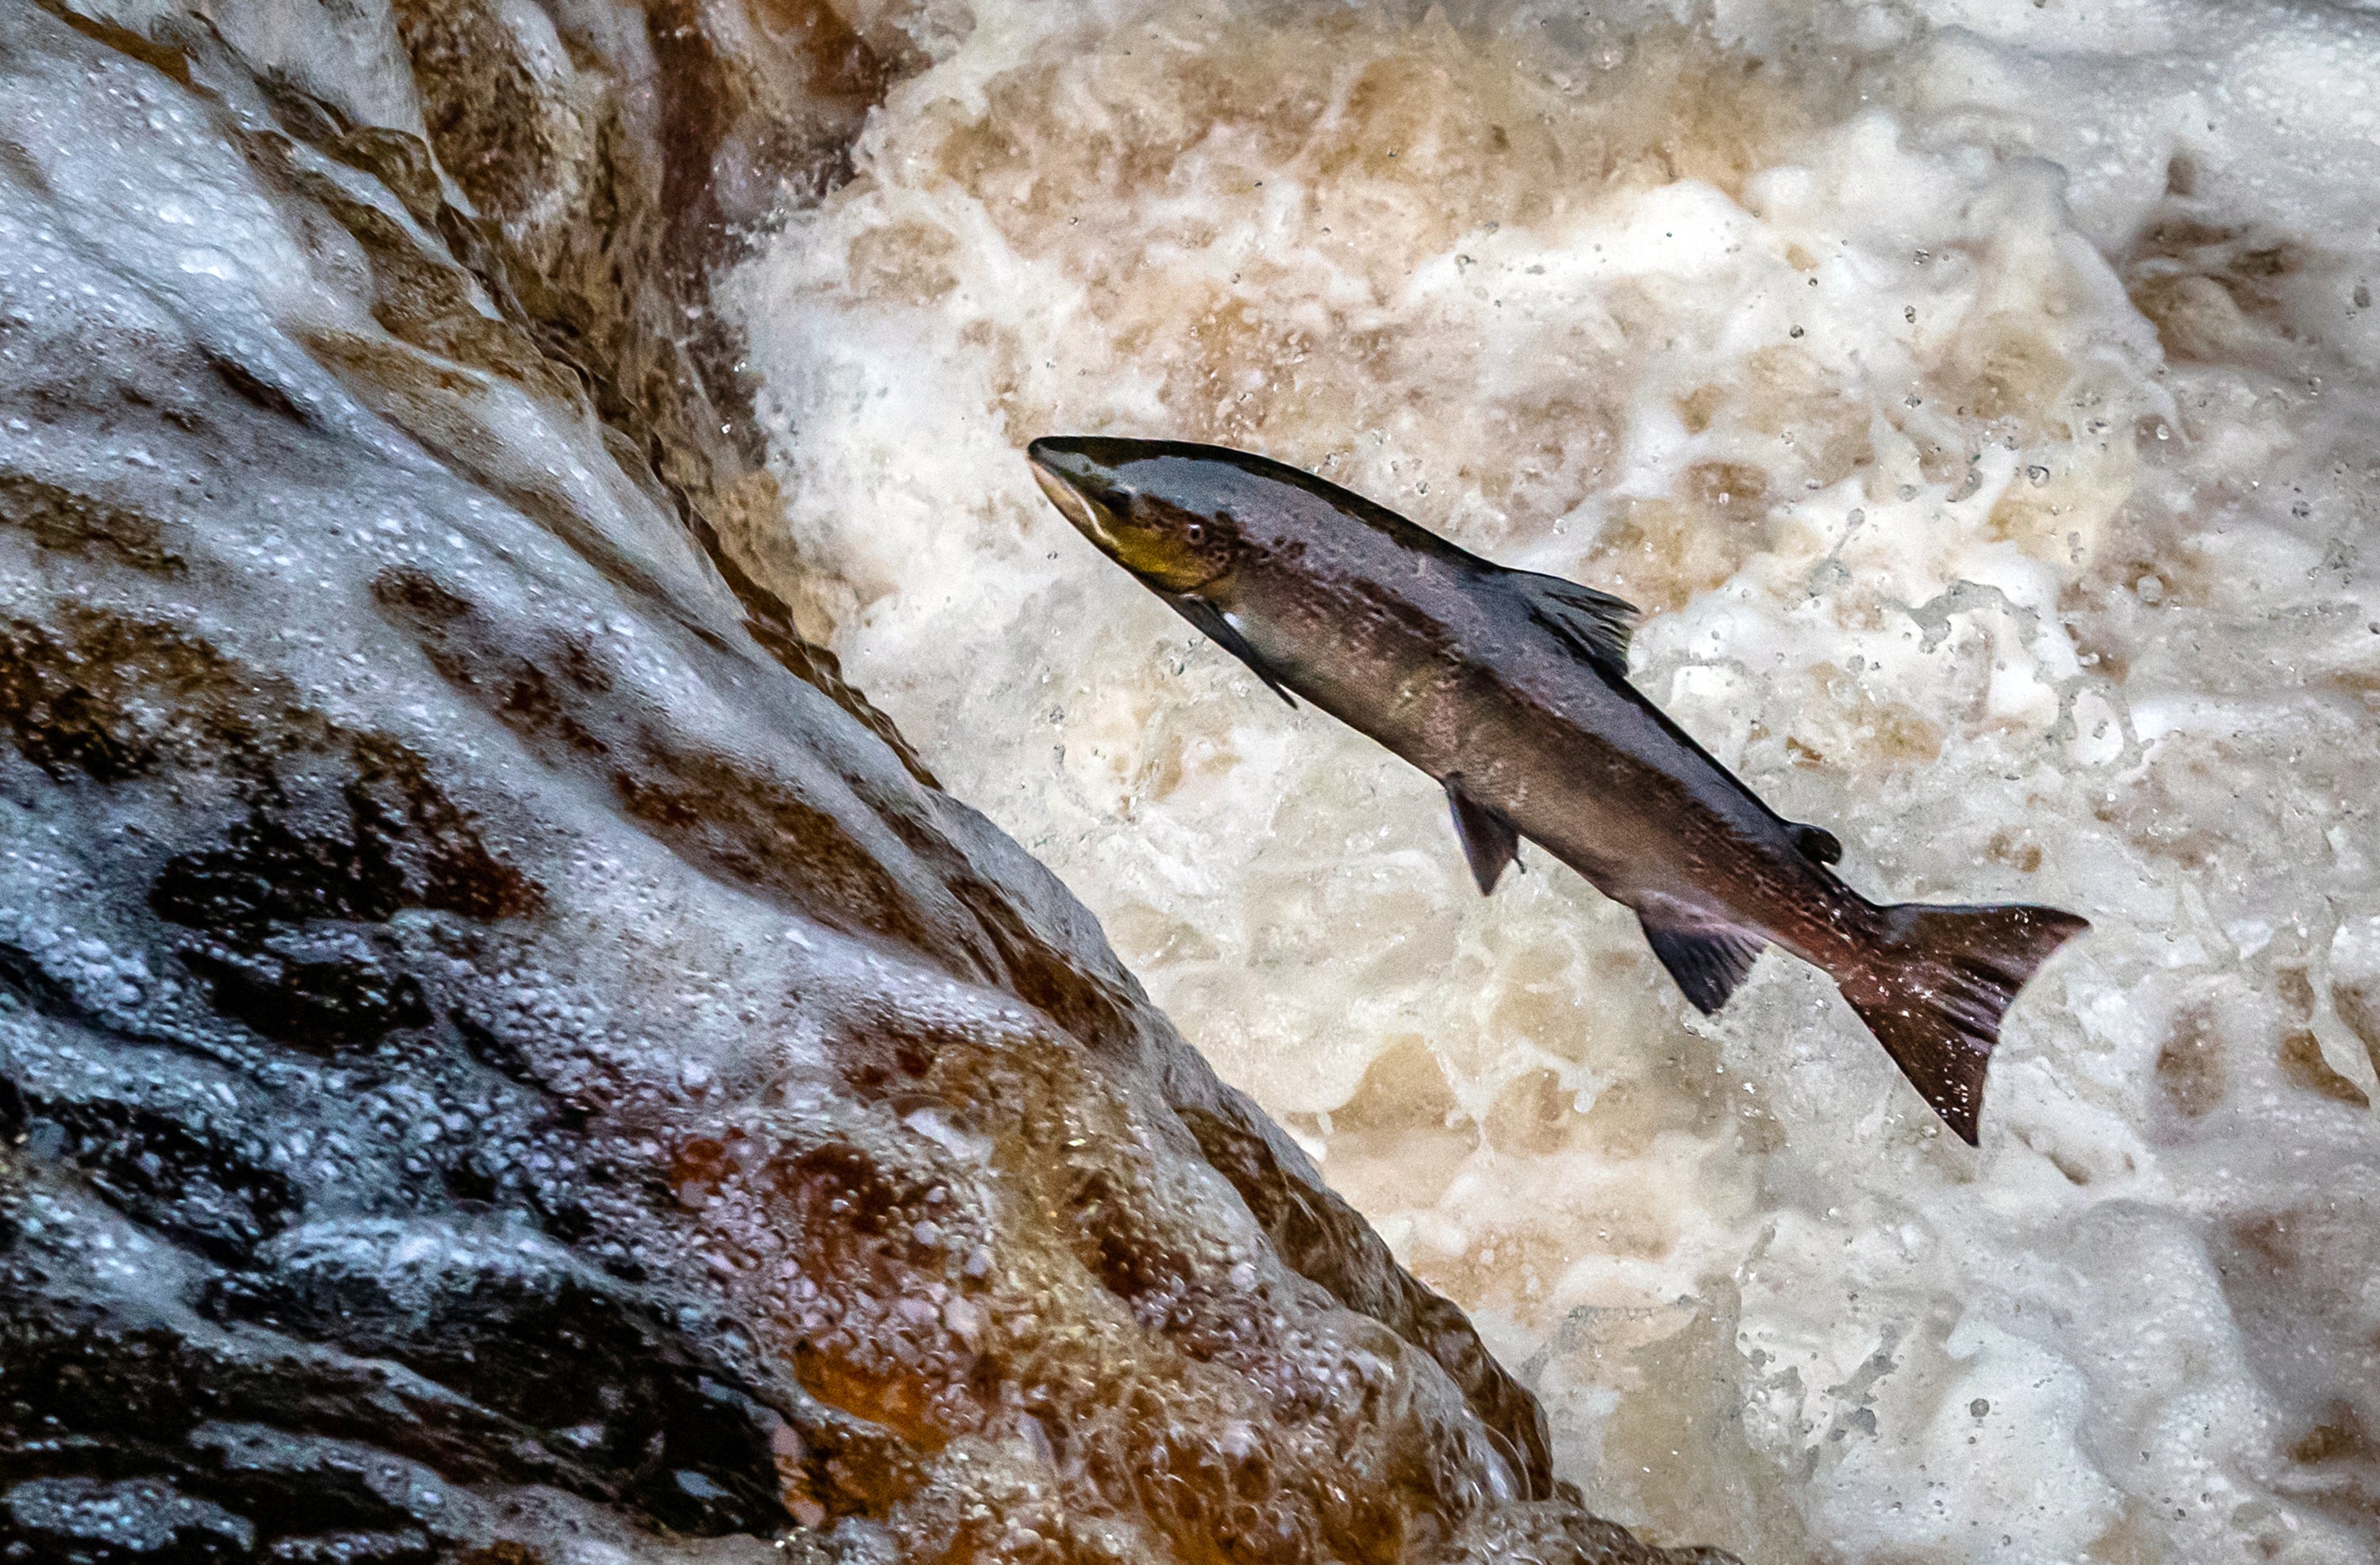 Wild salmon reaching crisis point in rivers, Environment Agency warns ...